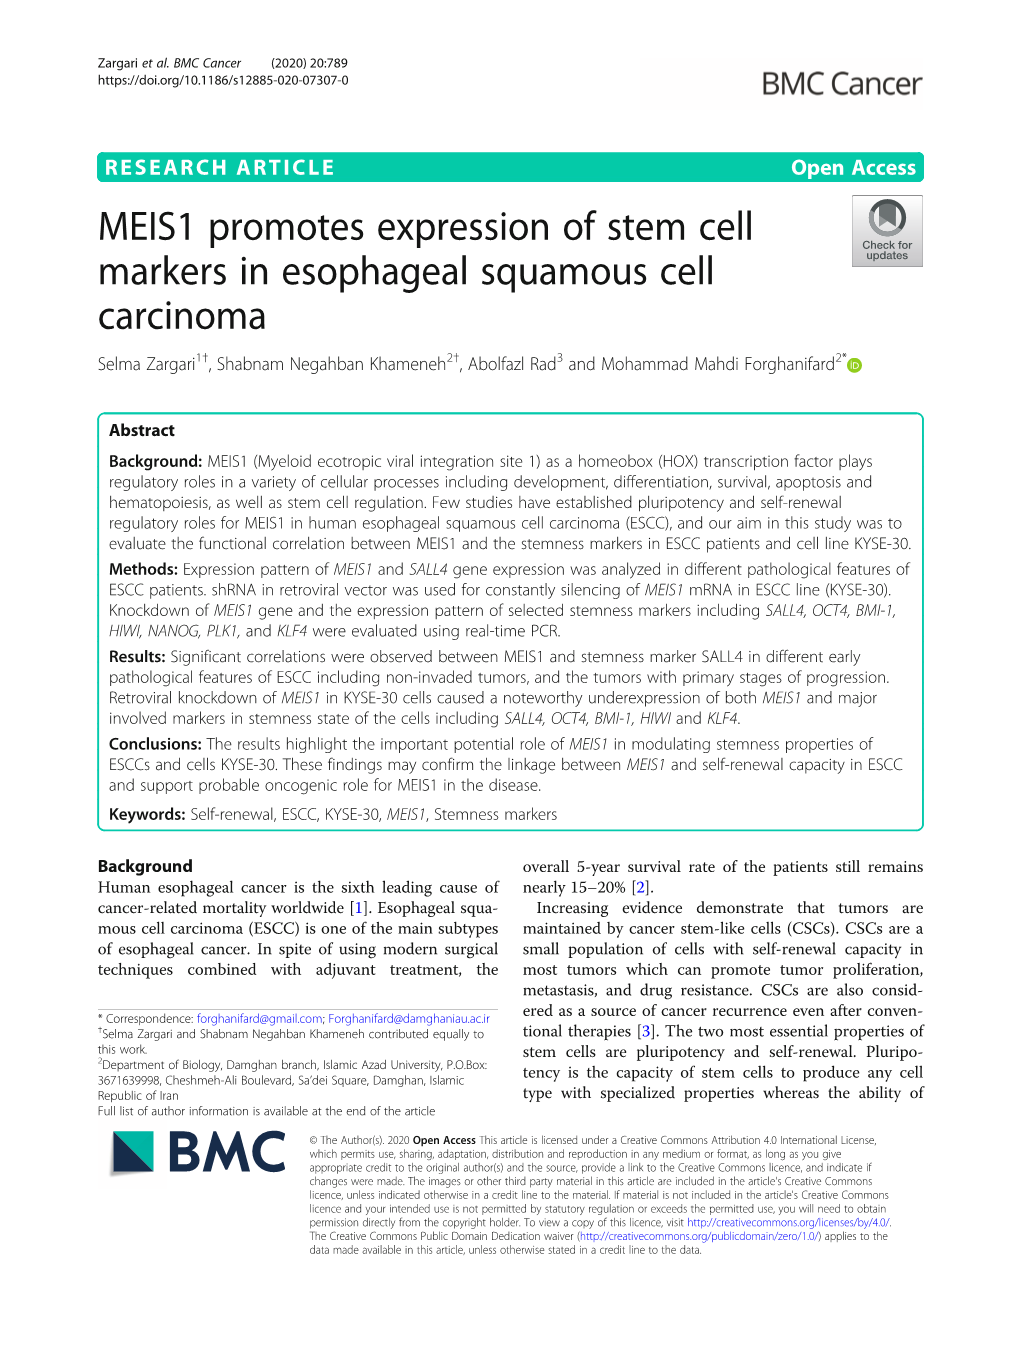 MEIS1 Promotes Expression of Stem Cell Markers in Esophageal